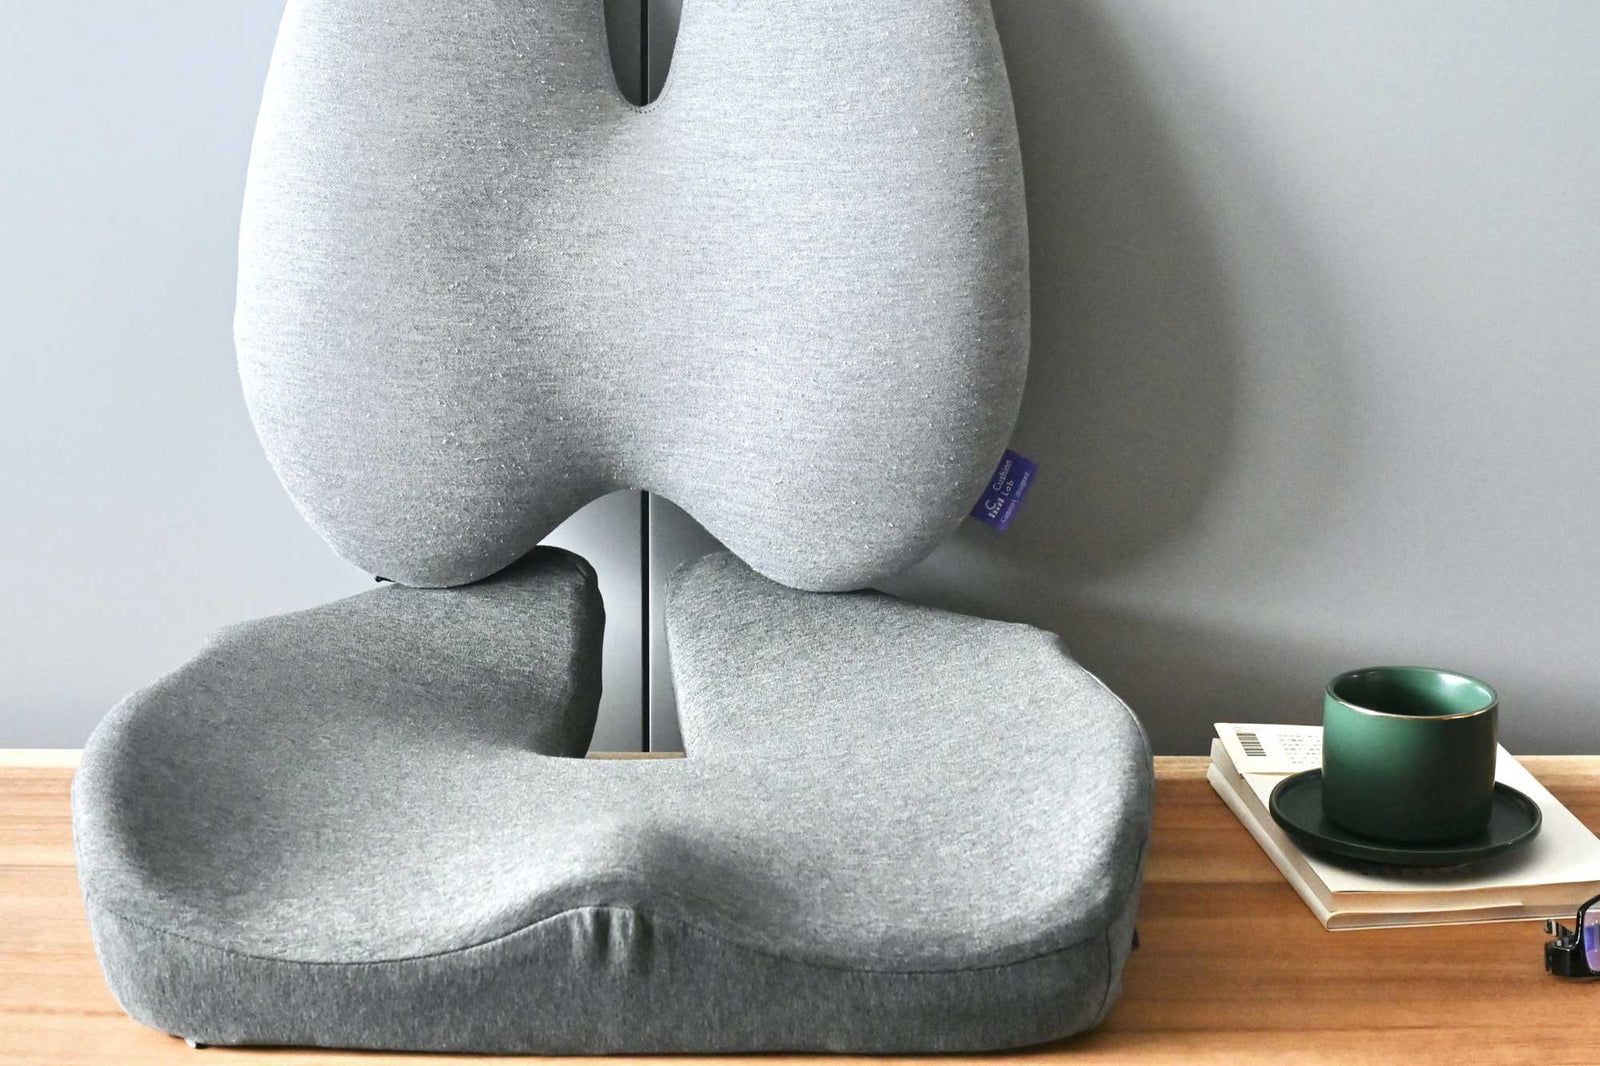 Why Orthopedists Recommend a Seat Cushion for Hip Pain Relief